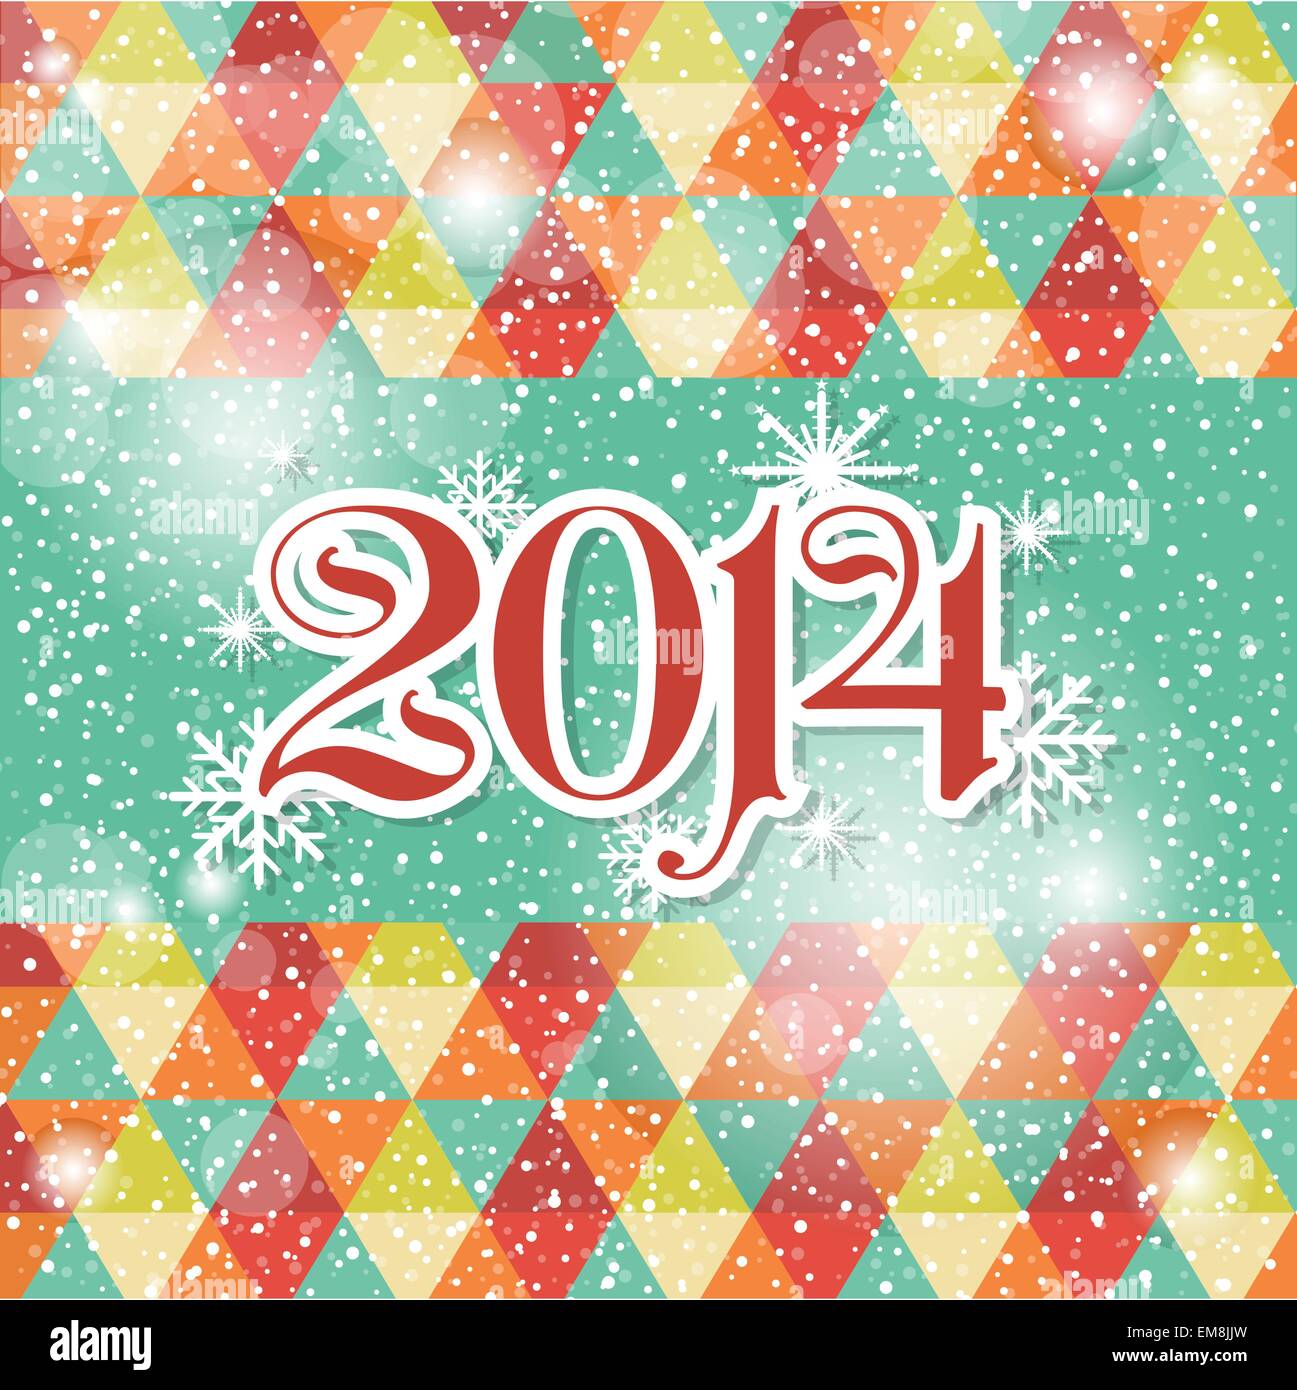 Happy New Year 2014 greeting card in blue and white colors Stock Vector